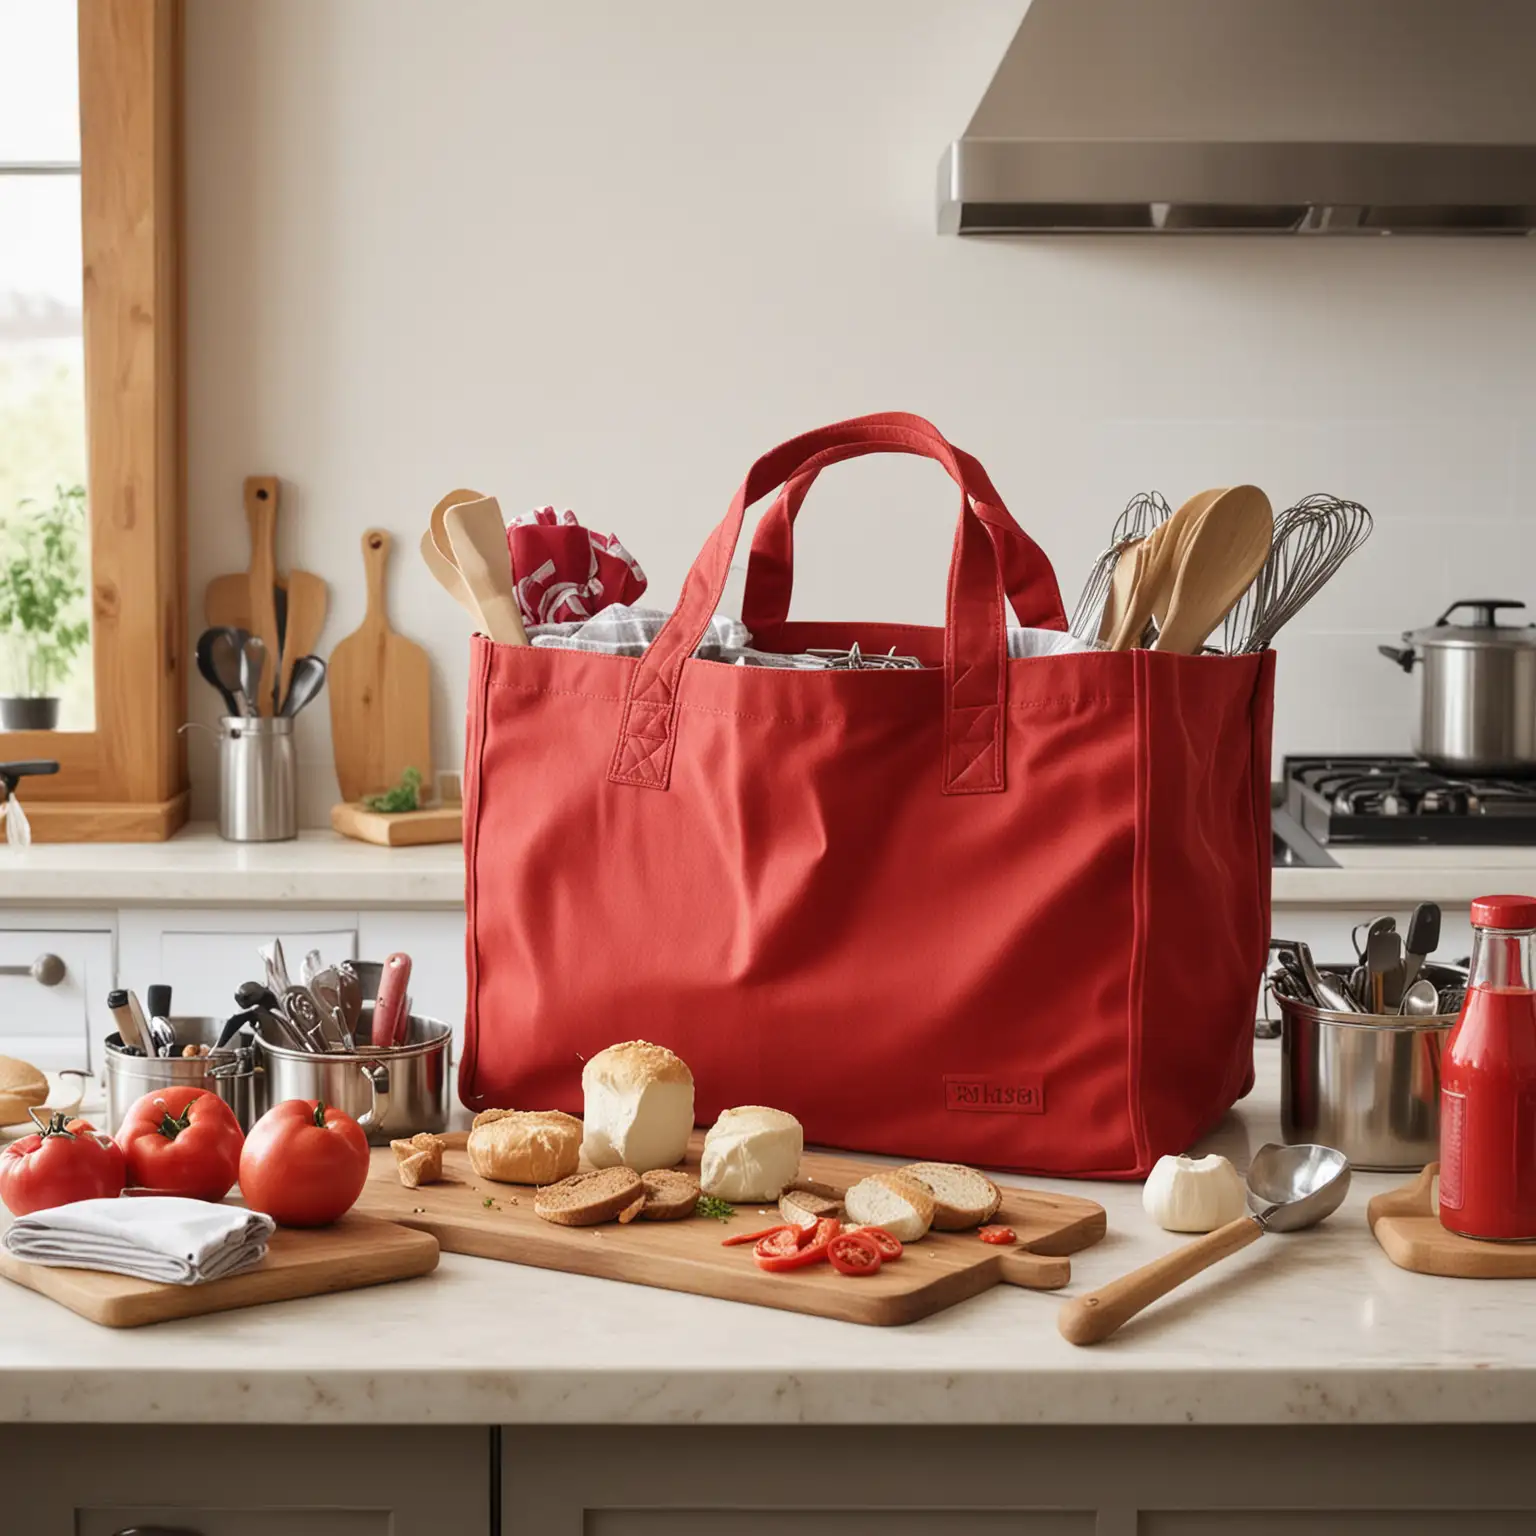 create a behind the scenes photo of a chef and her red tote bag, how she carries all of her accessories while having a busy day in the kitchen. analog camera style